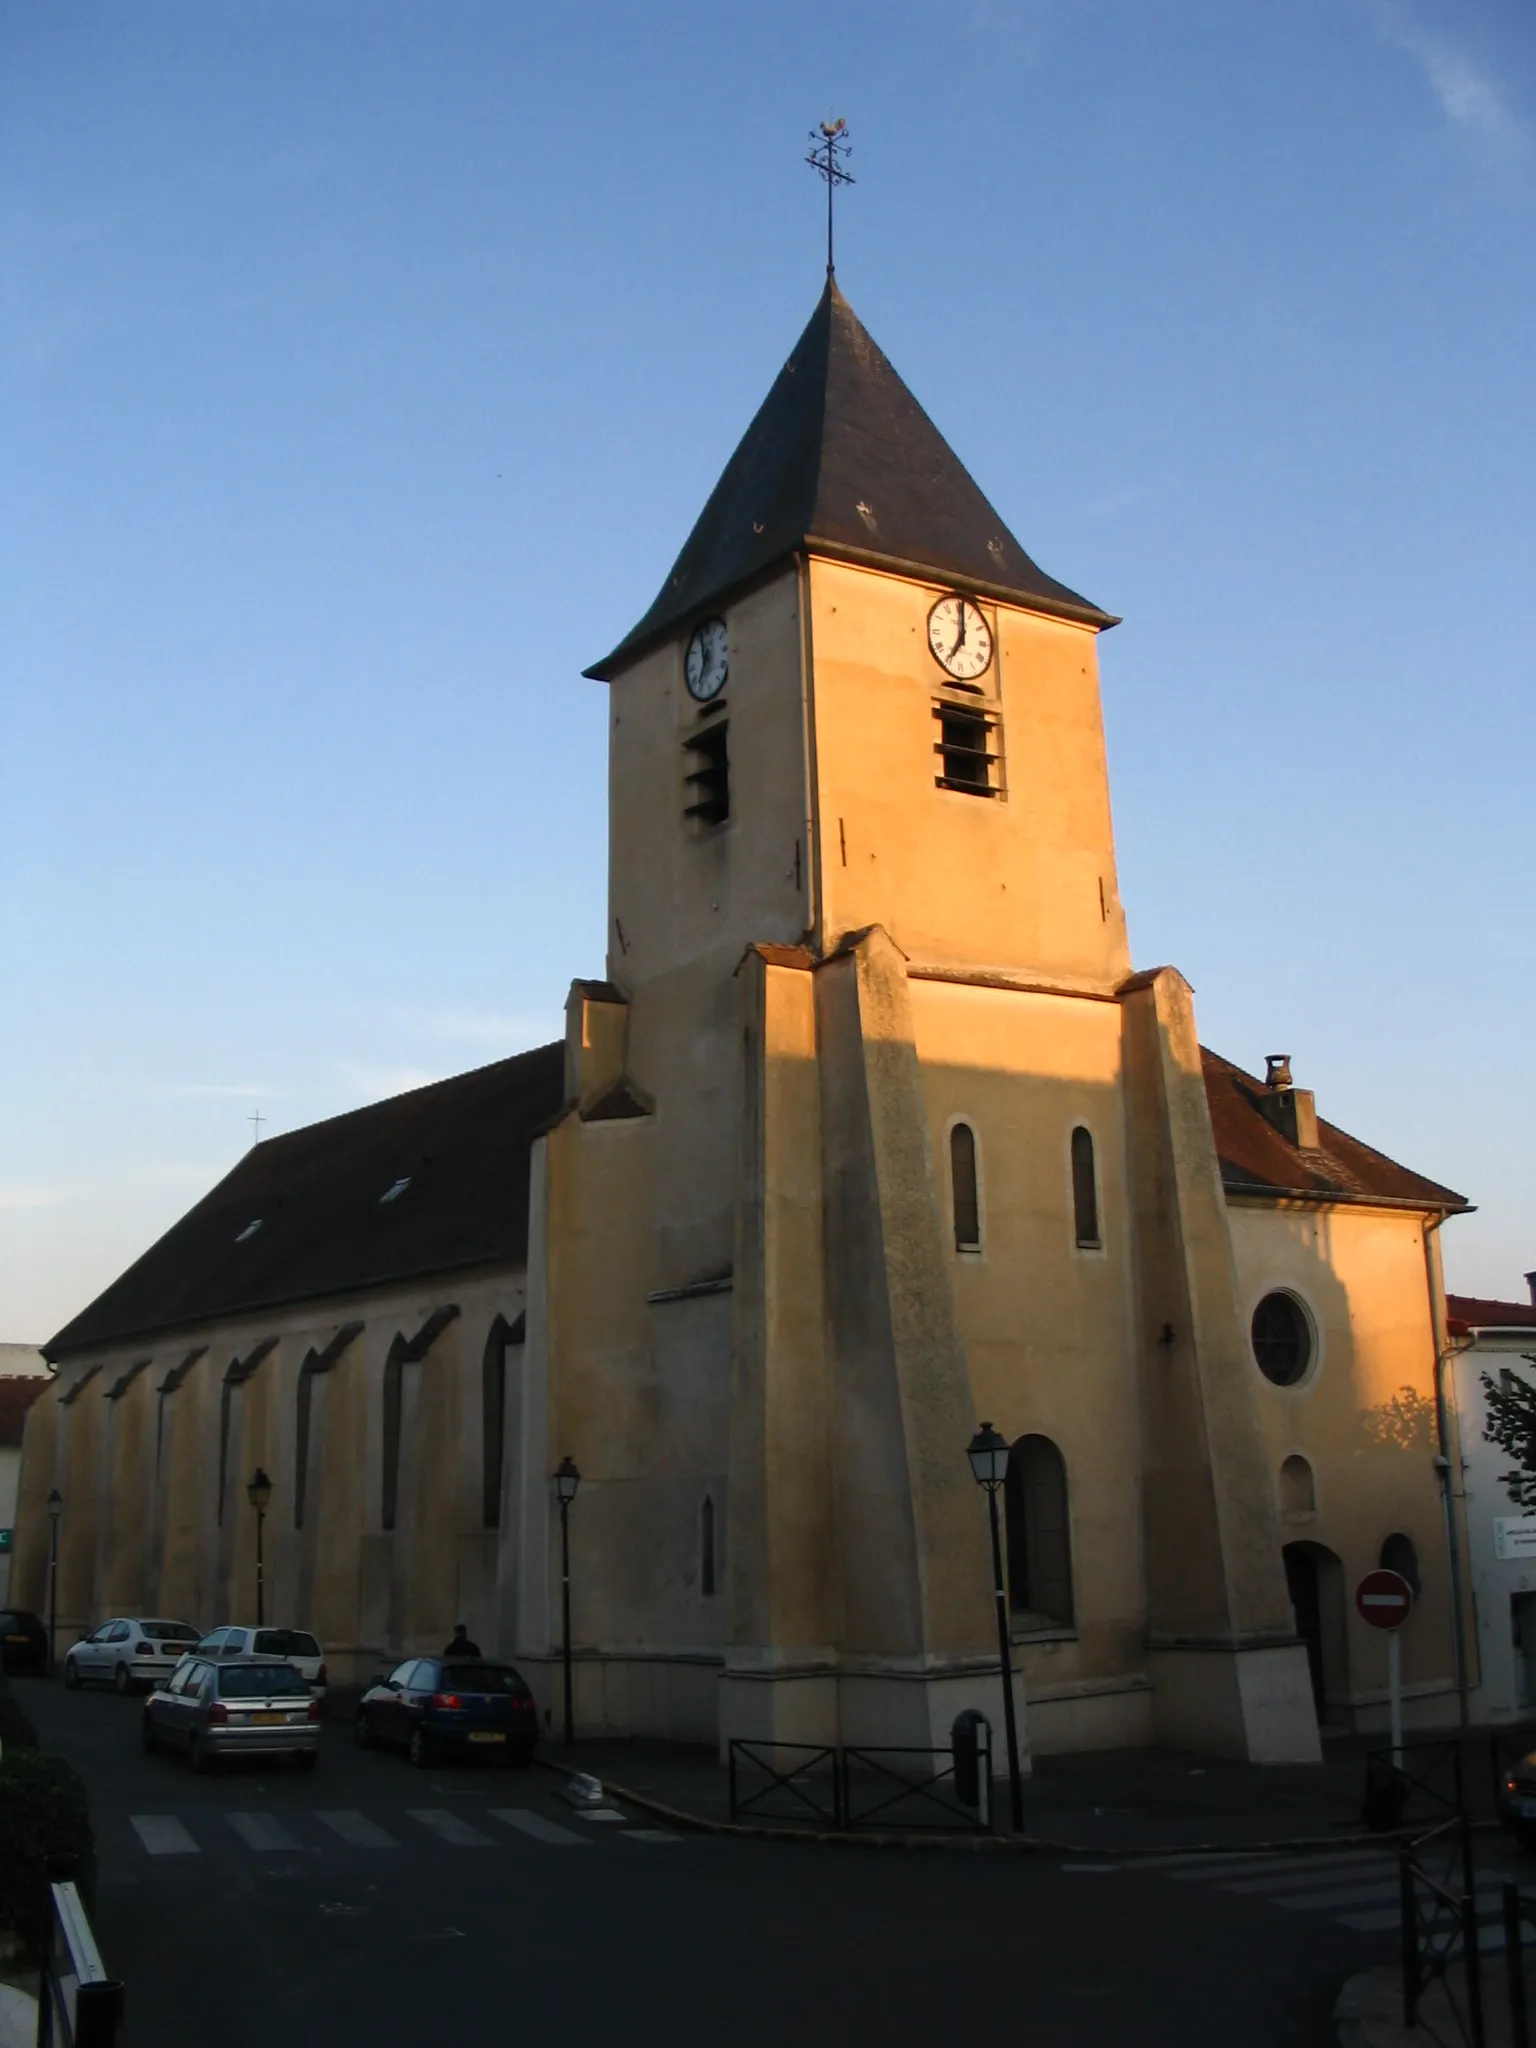 Photo showing: The Roman Catholic church of Thorigny-sur-Marne, Seine-et-Marne, France.